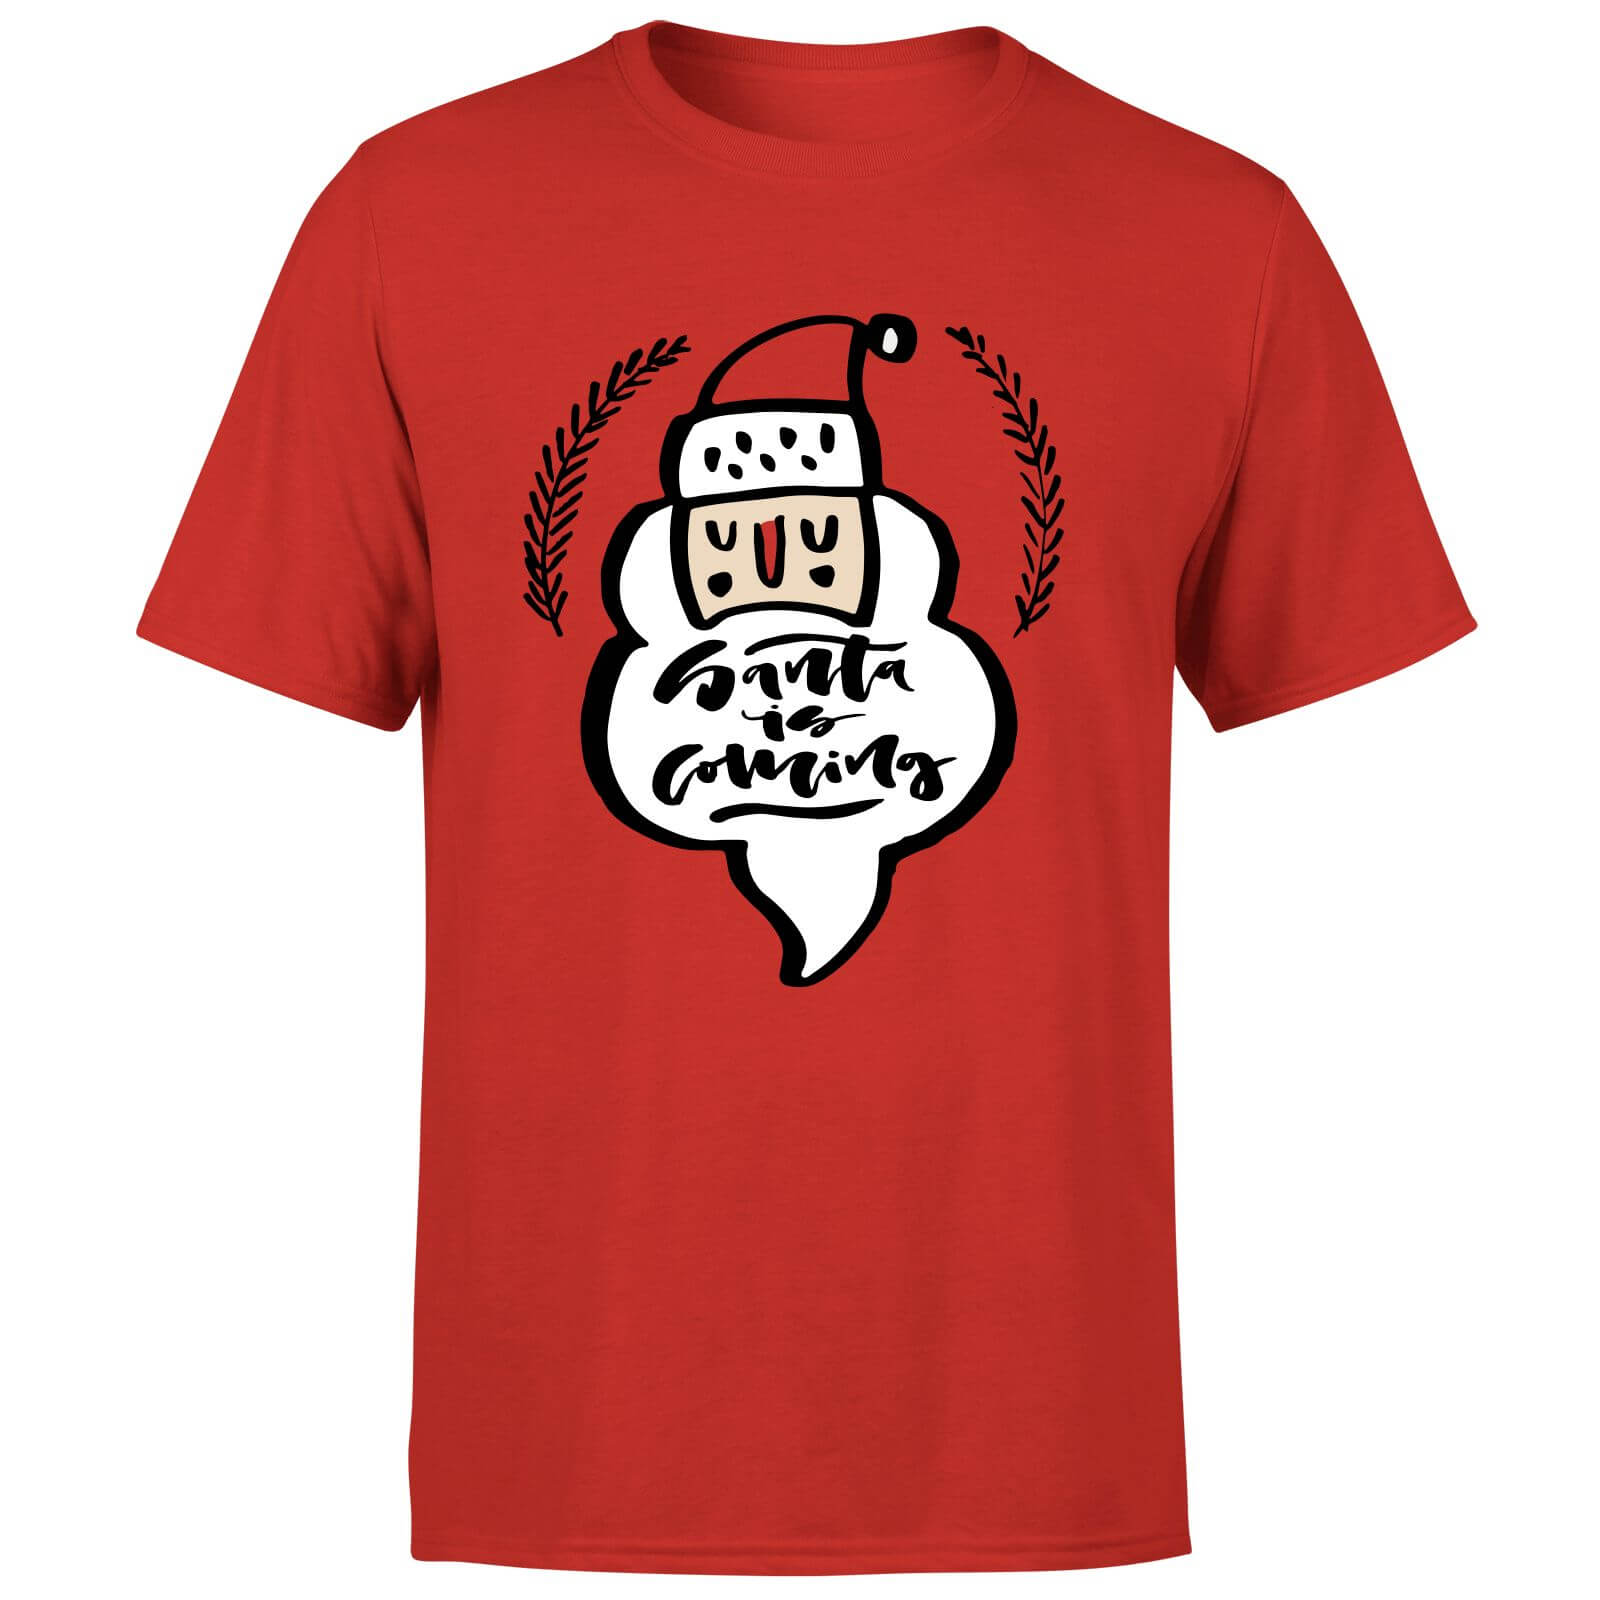 Santa is Coming T-Shirt - Red - S - Red